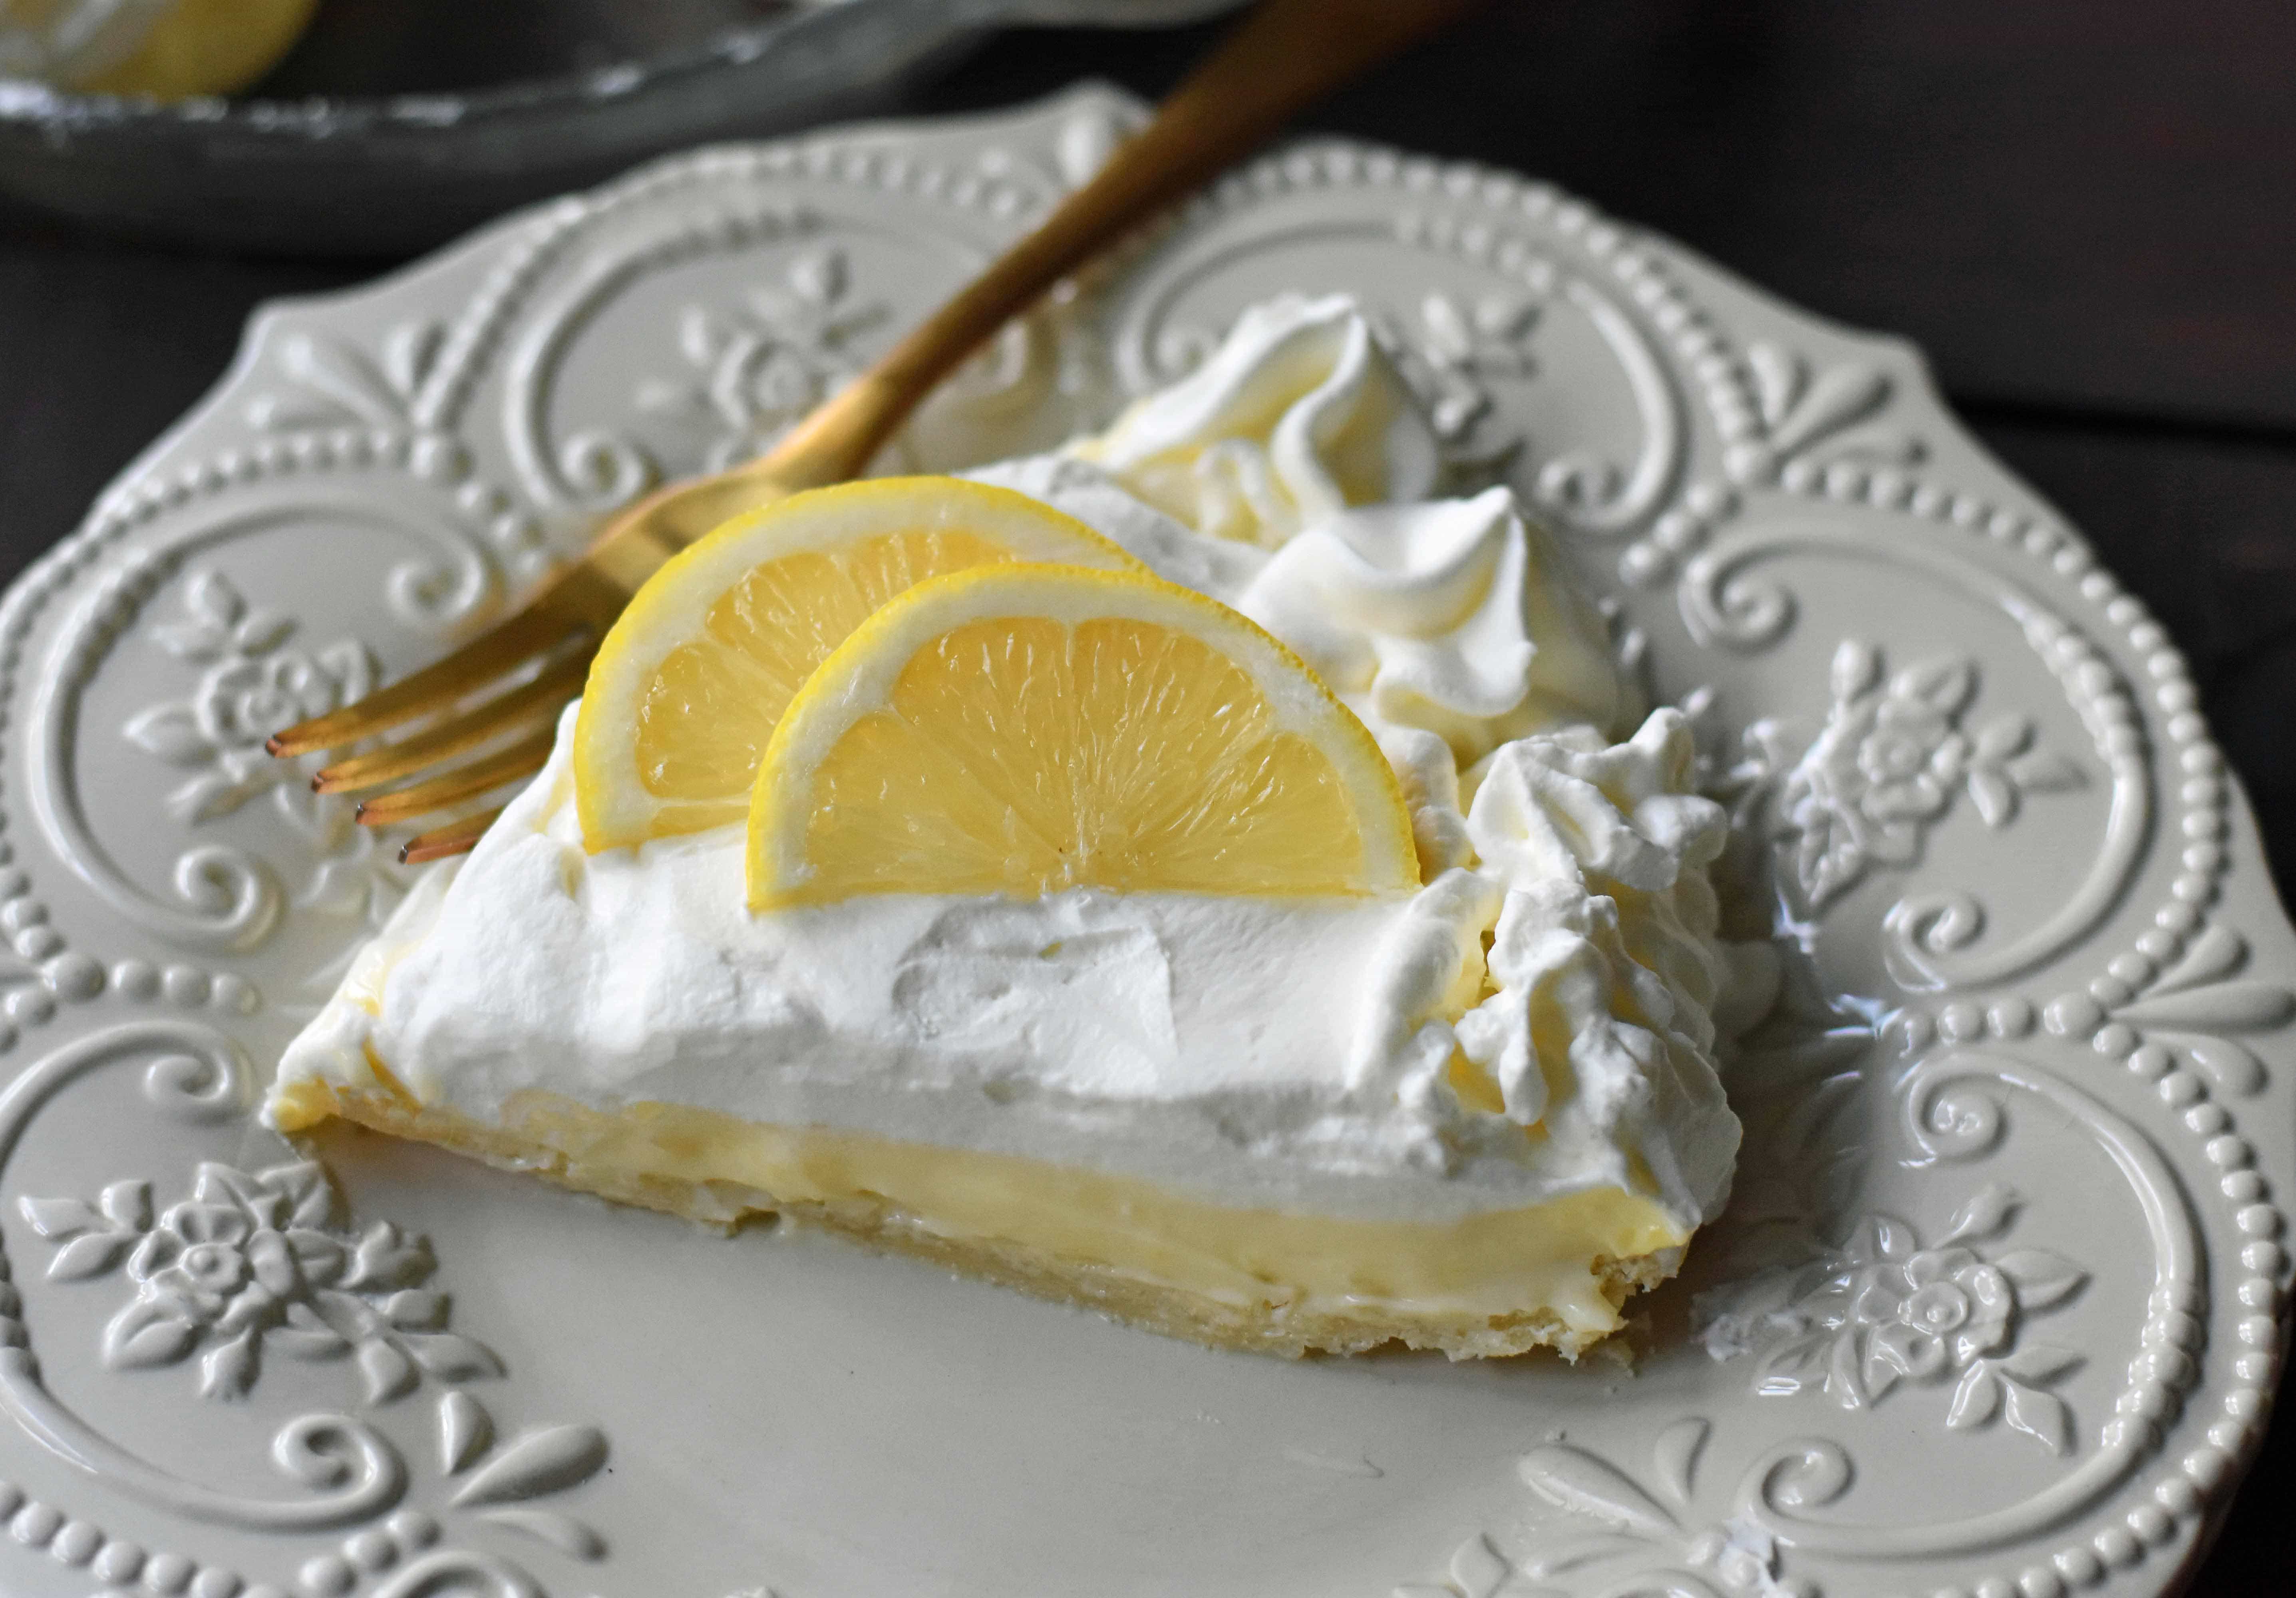 Sweet Lemon Sour Cream Pie made with freshly squeezed lemon juice, sugar, eggs, and sour cream to make it rich and creamy. All topped with homemade whipped cream in a buttery, flaky crust. A Marie Callender's Sour Cream Lemon Pie Copycat Recipe. www.modernhoney.com